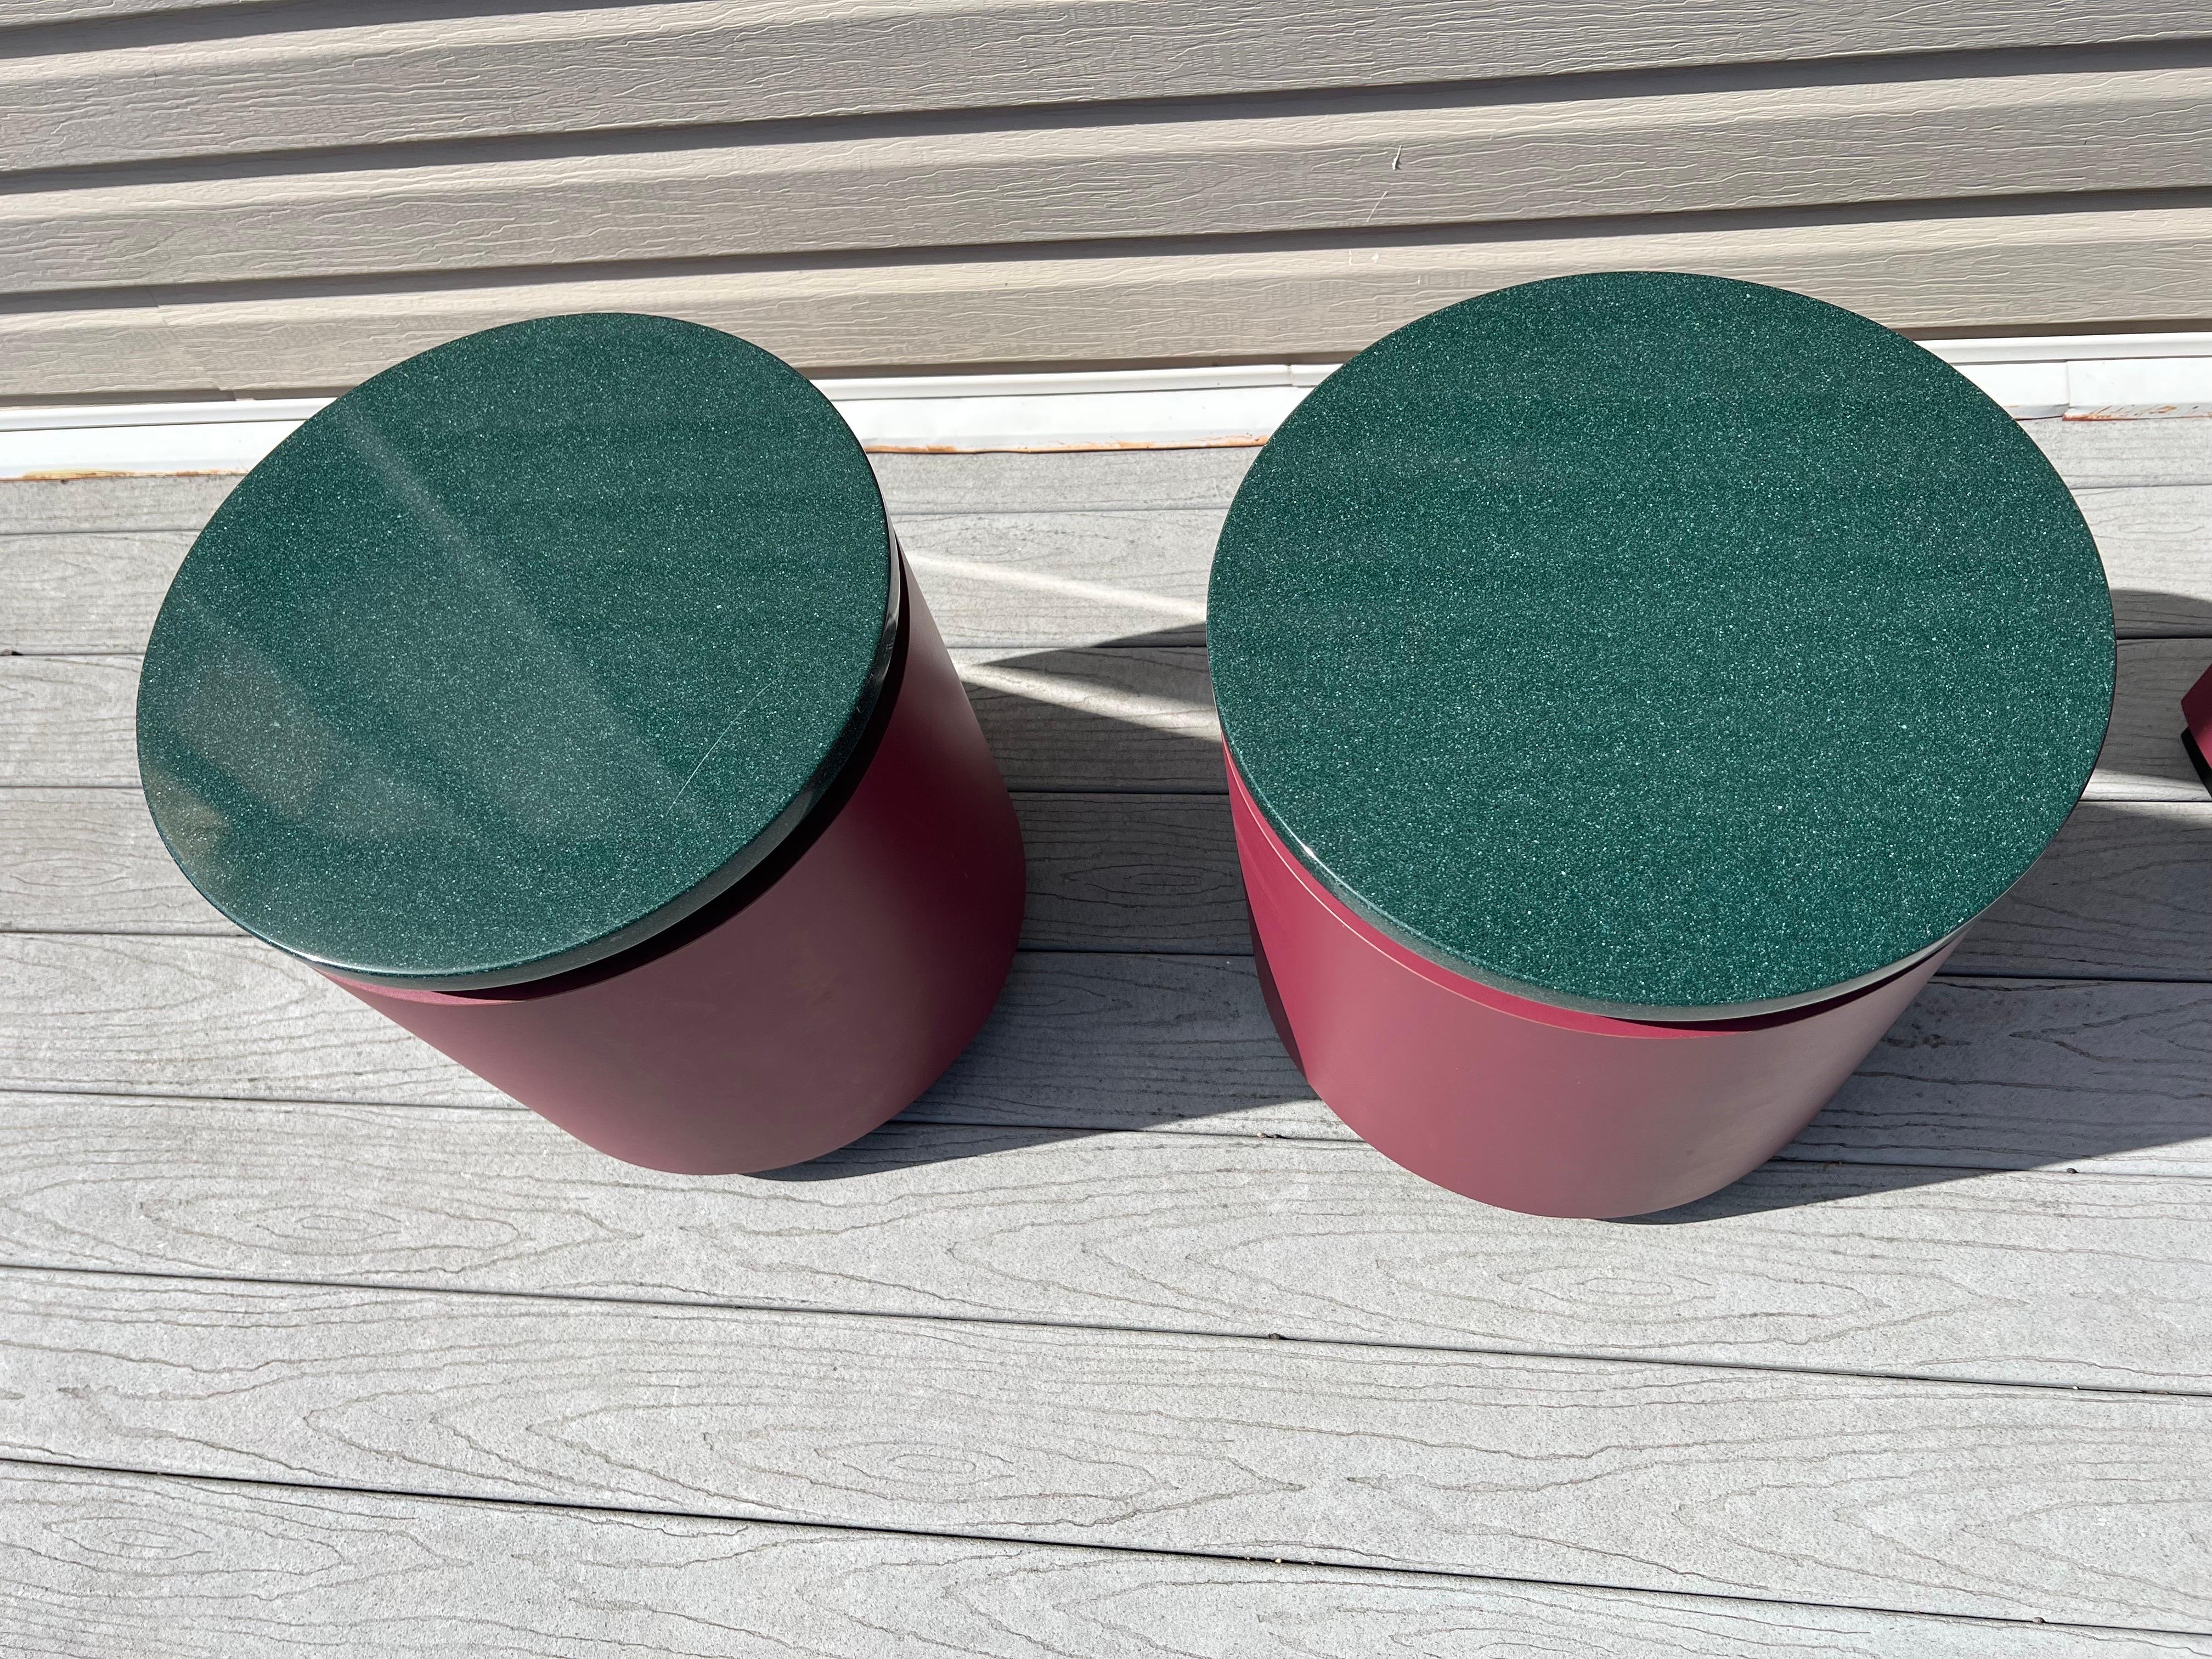 North American 1980s Mauve Pink with Green Stone Custom Side Tables, a Pair For Sale